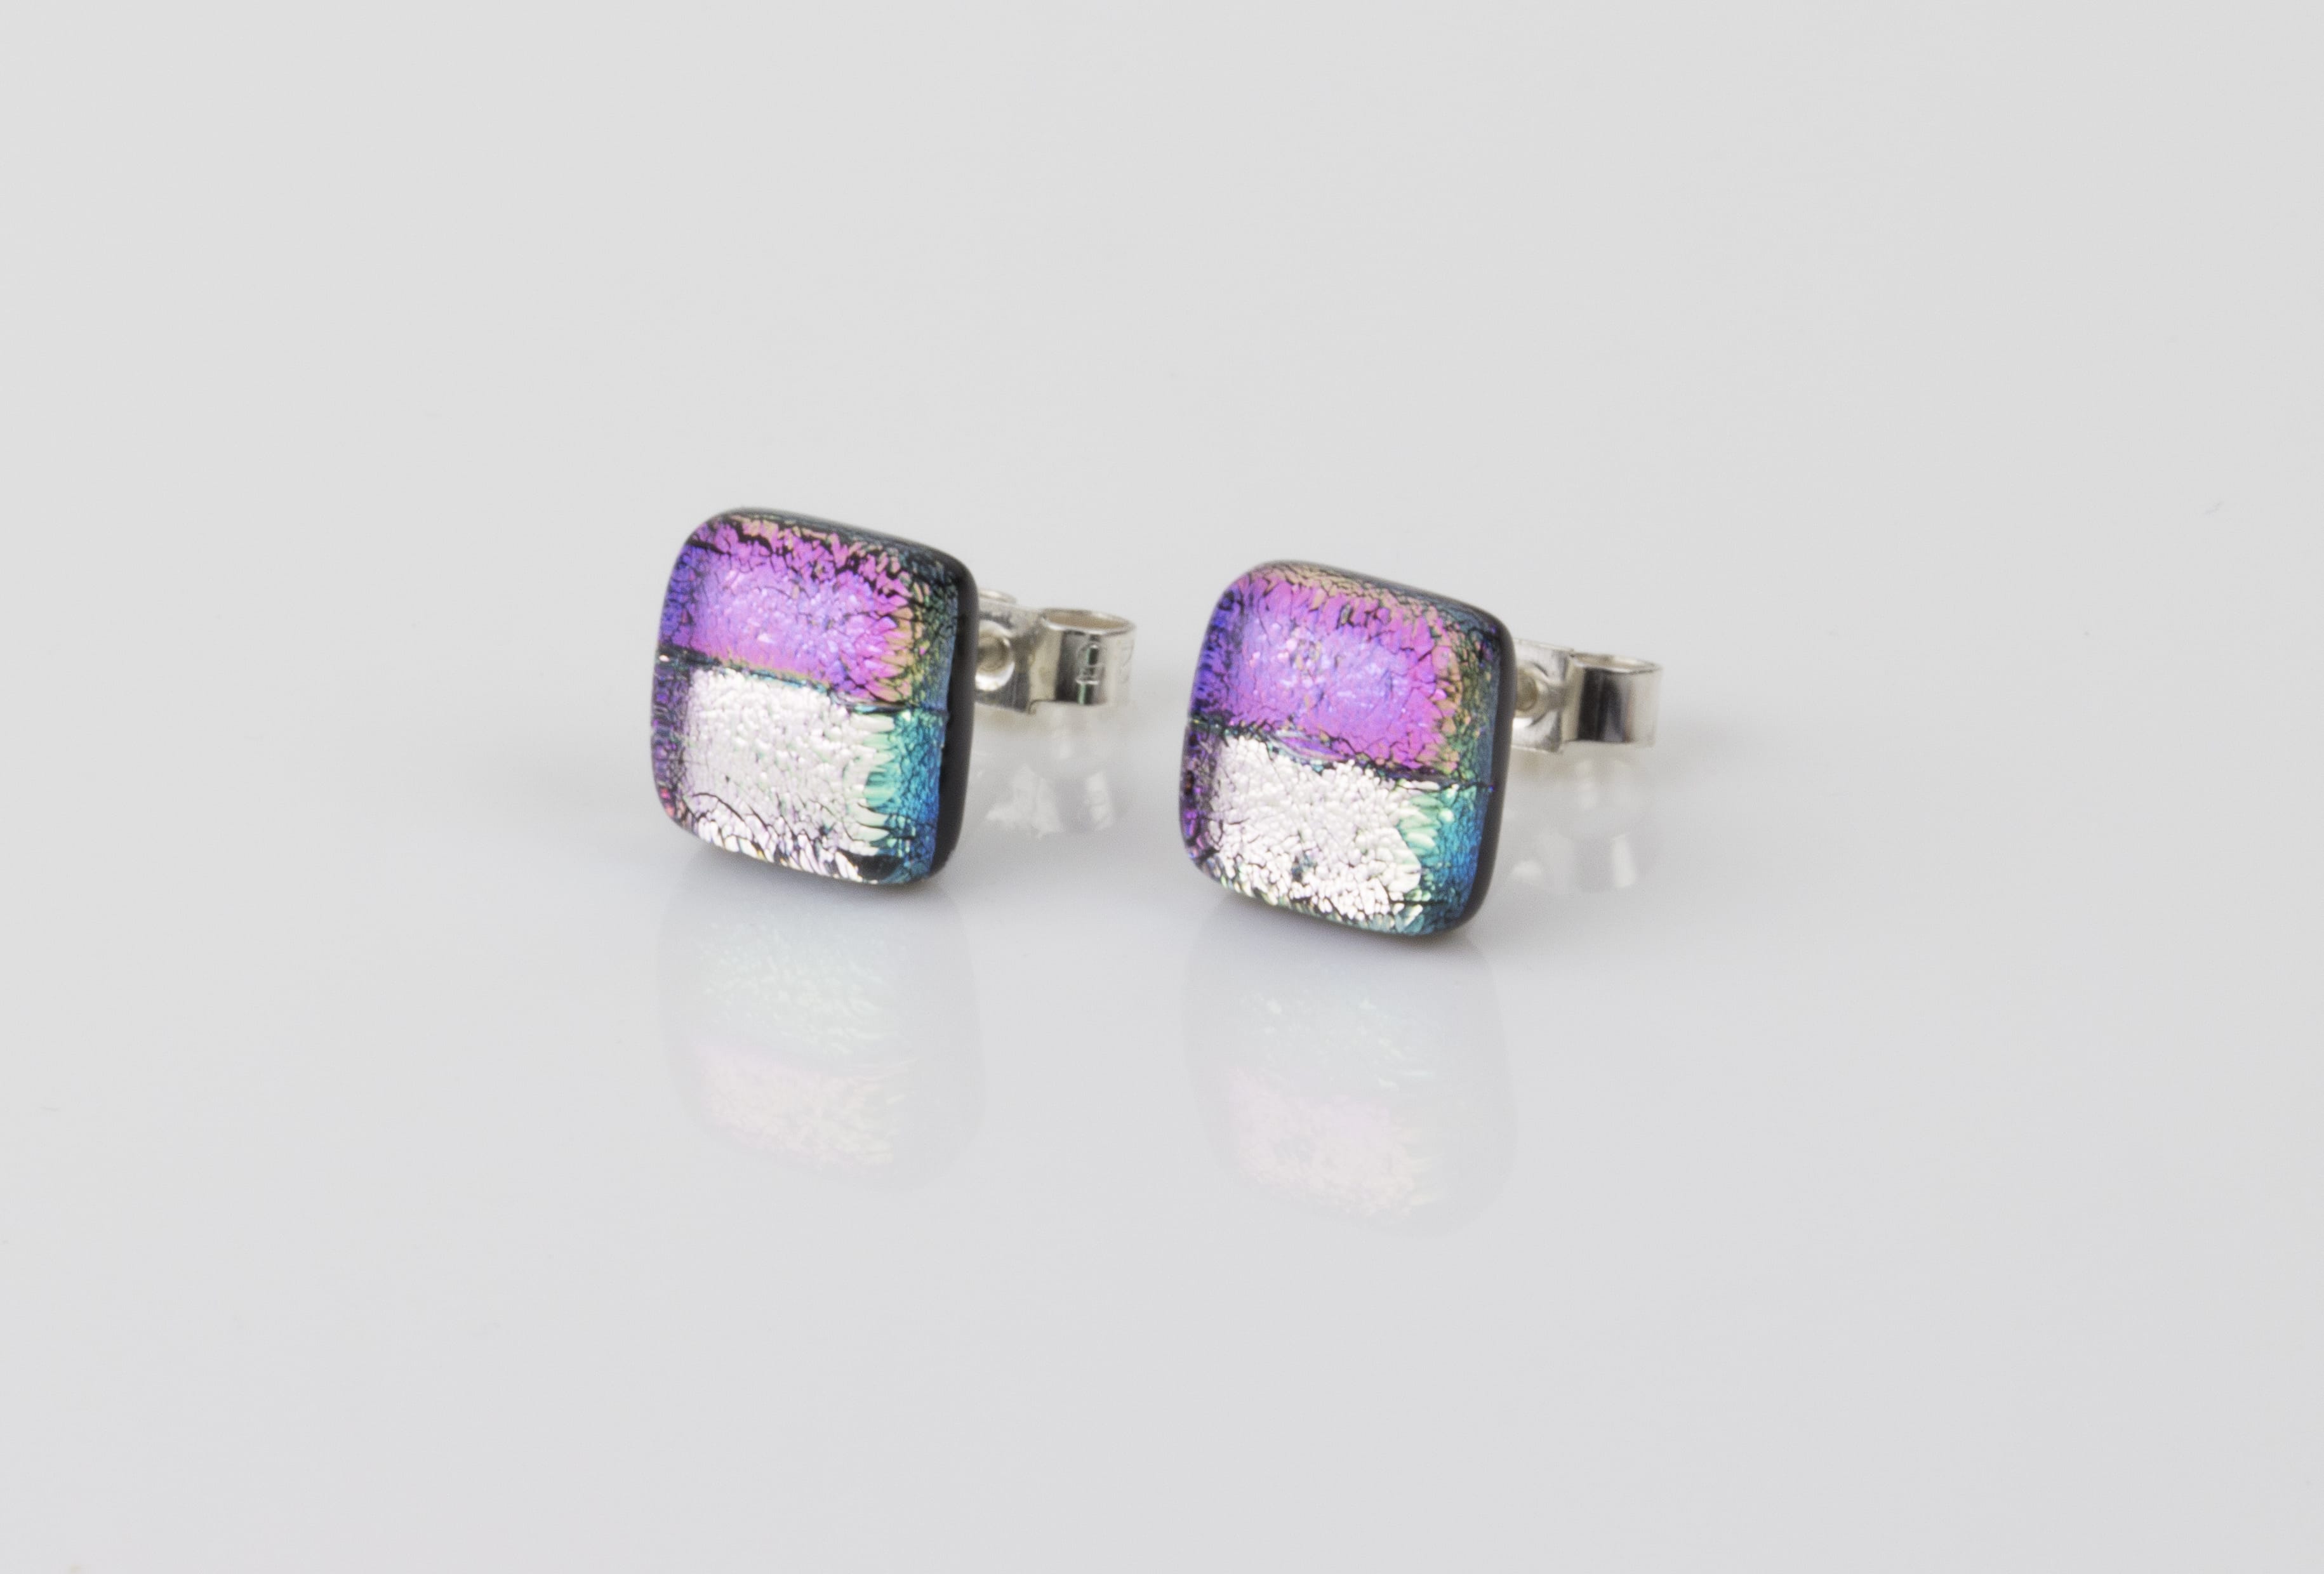 Dichroic glass jewellery uk, Handmade Earrings 2 tone pink glass earrings, stud earrings with sterling silver posts, square, glass 8-10mm